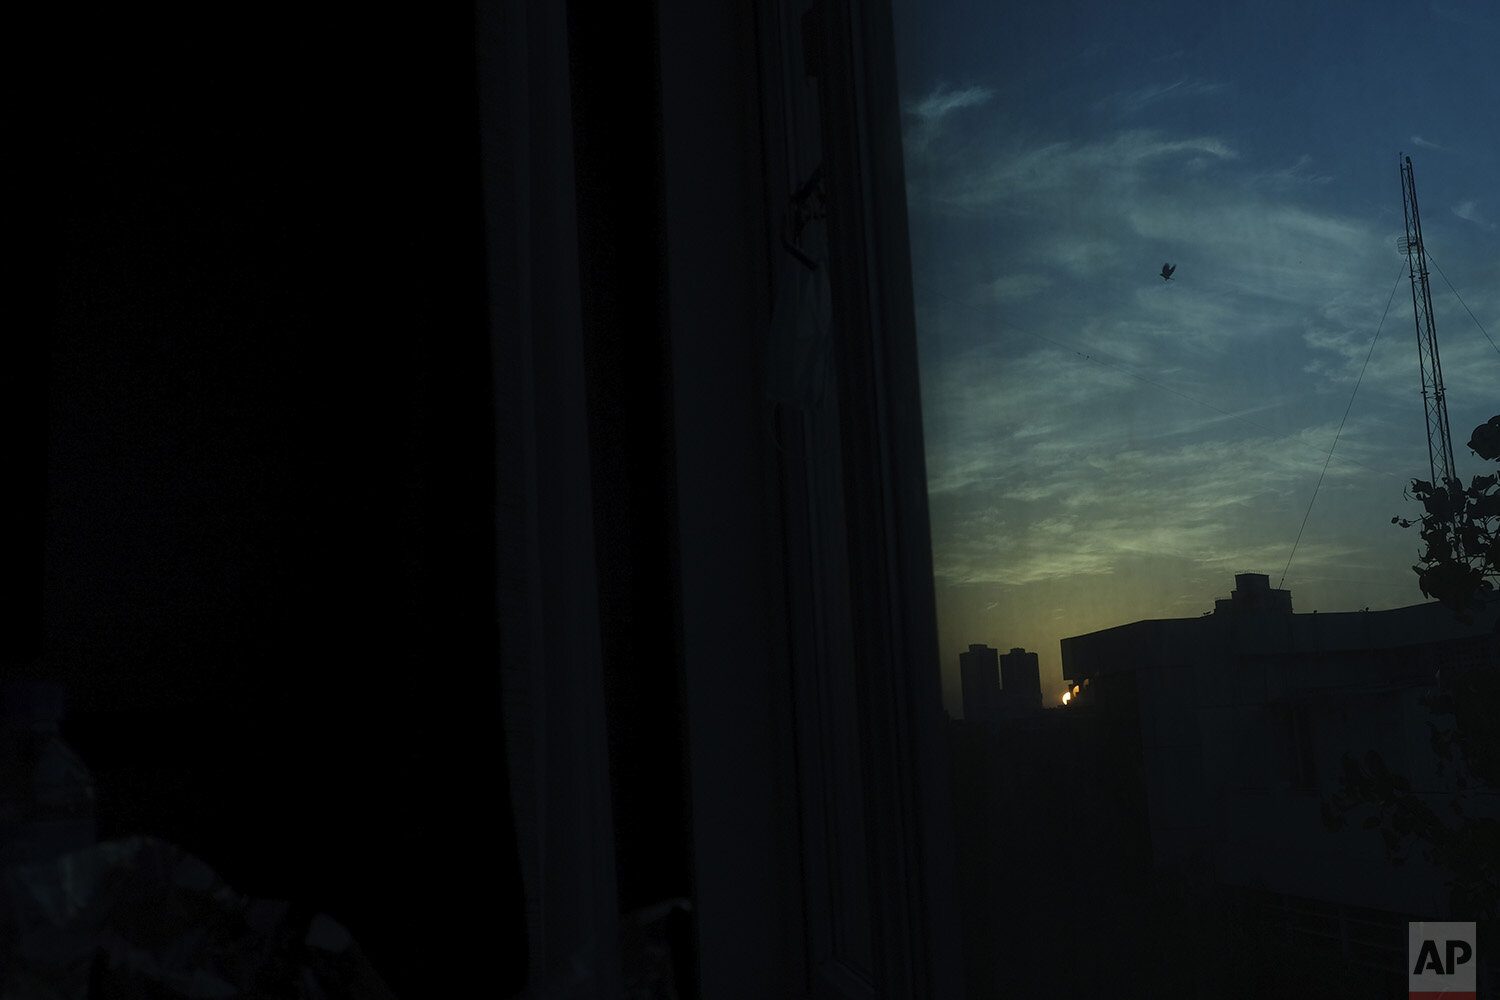  In this April 23, 2020, photo, a bird flies at sunset as seen from the hotel room of Associated Press photographer Rafiq Maqbool, where he has been quarantined, in Mumbai, India. Maqbool was among dozens of journalists who tested positive for COVID-